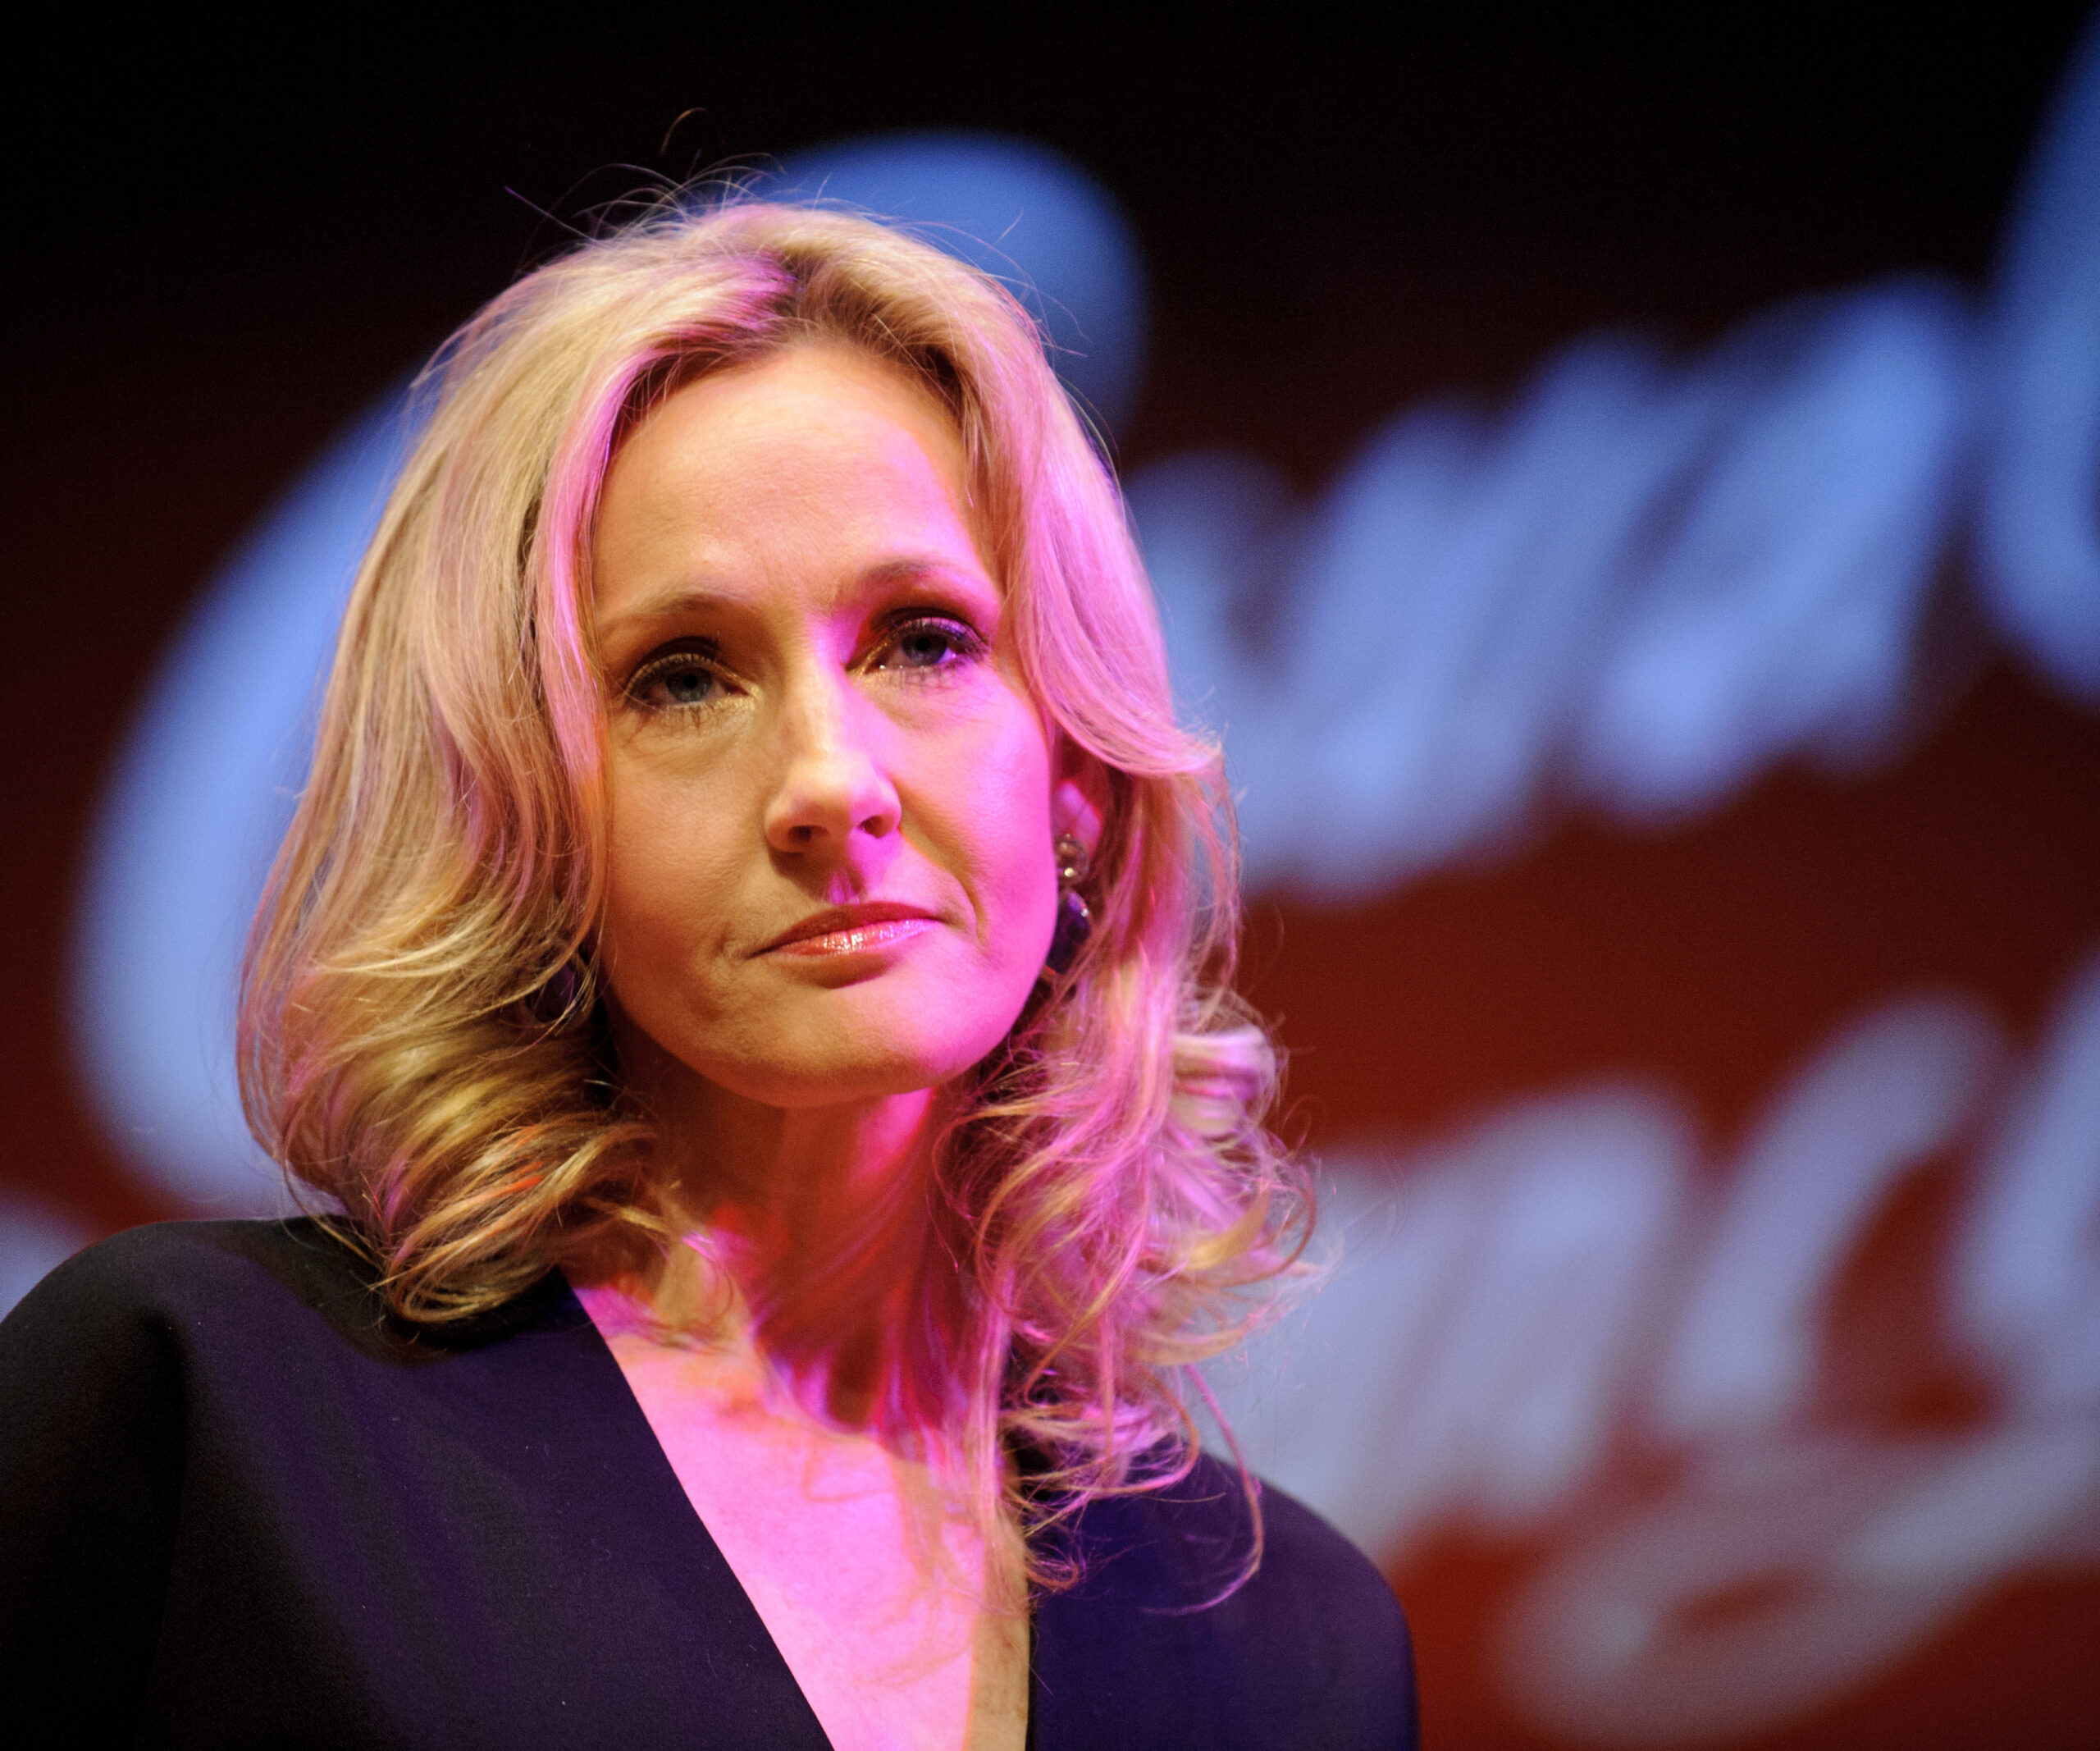 JK Rowling sent flowers to Orlando victim’s funeral